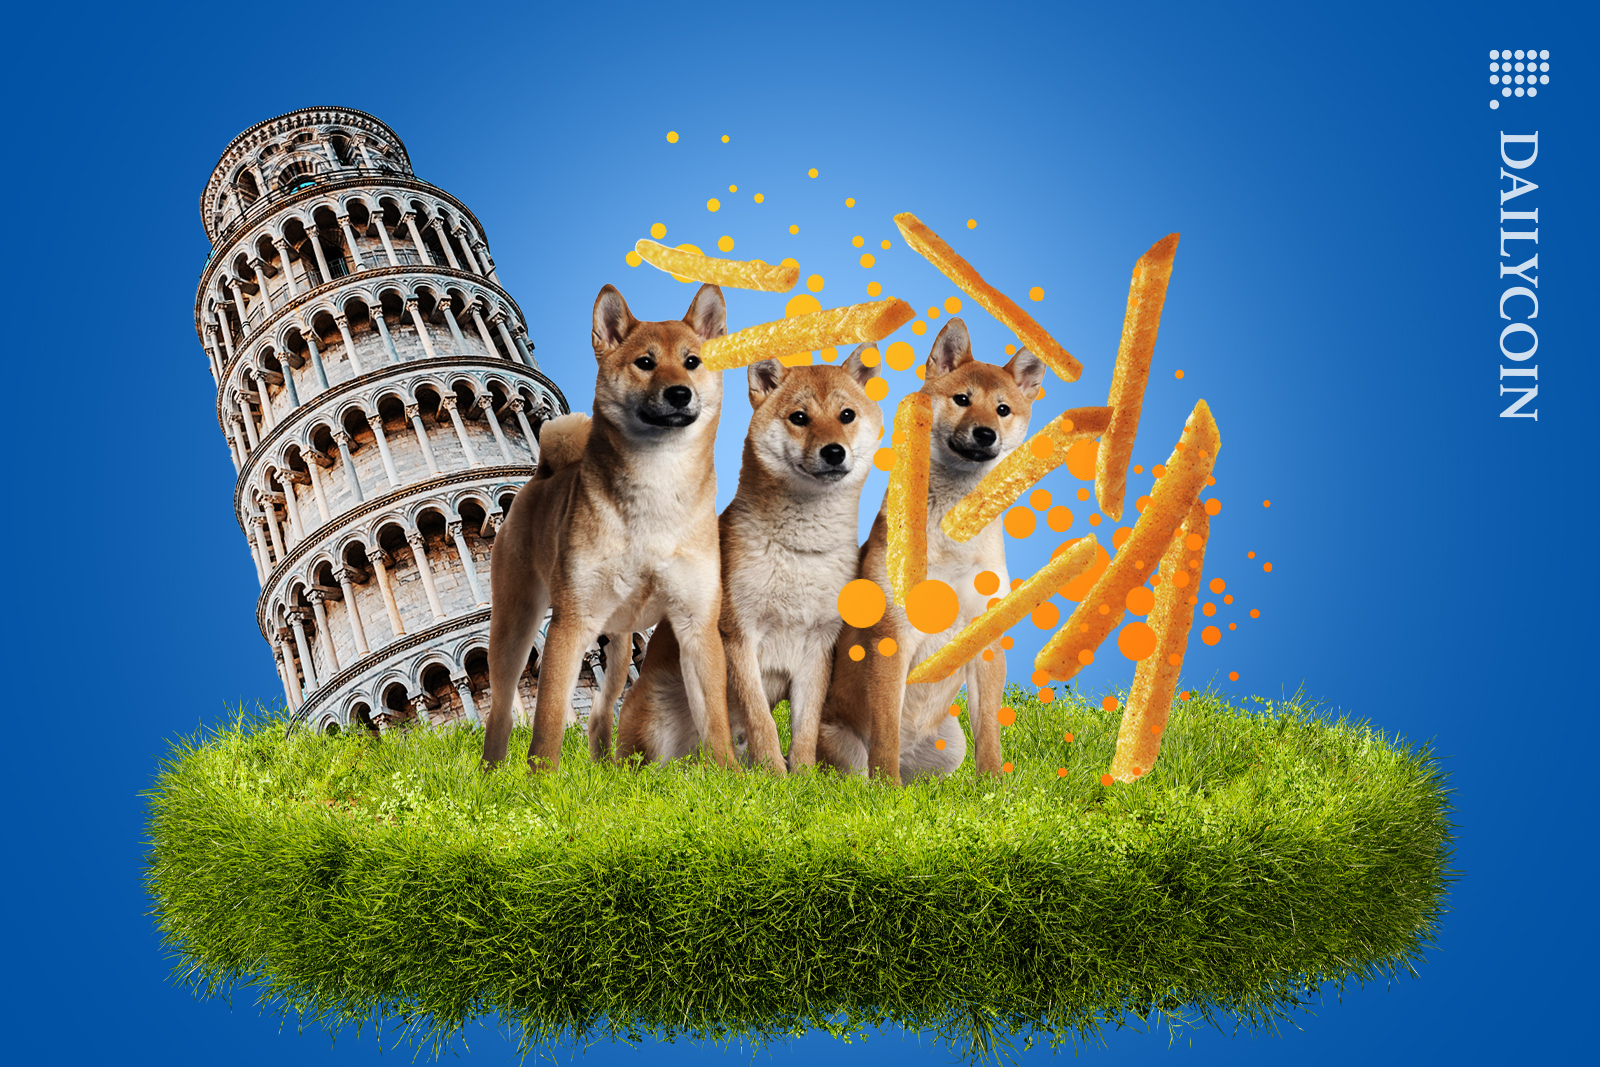 Shiba dogs looking at french fries in Italy, next to a Leaning Tower of Pisa.